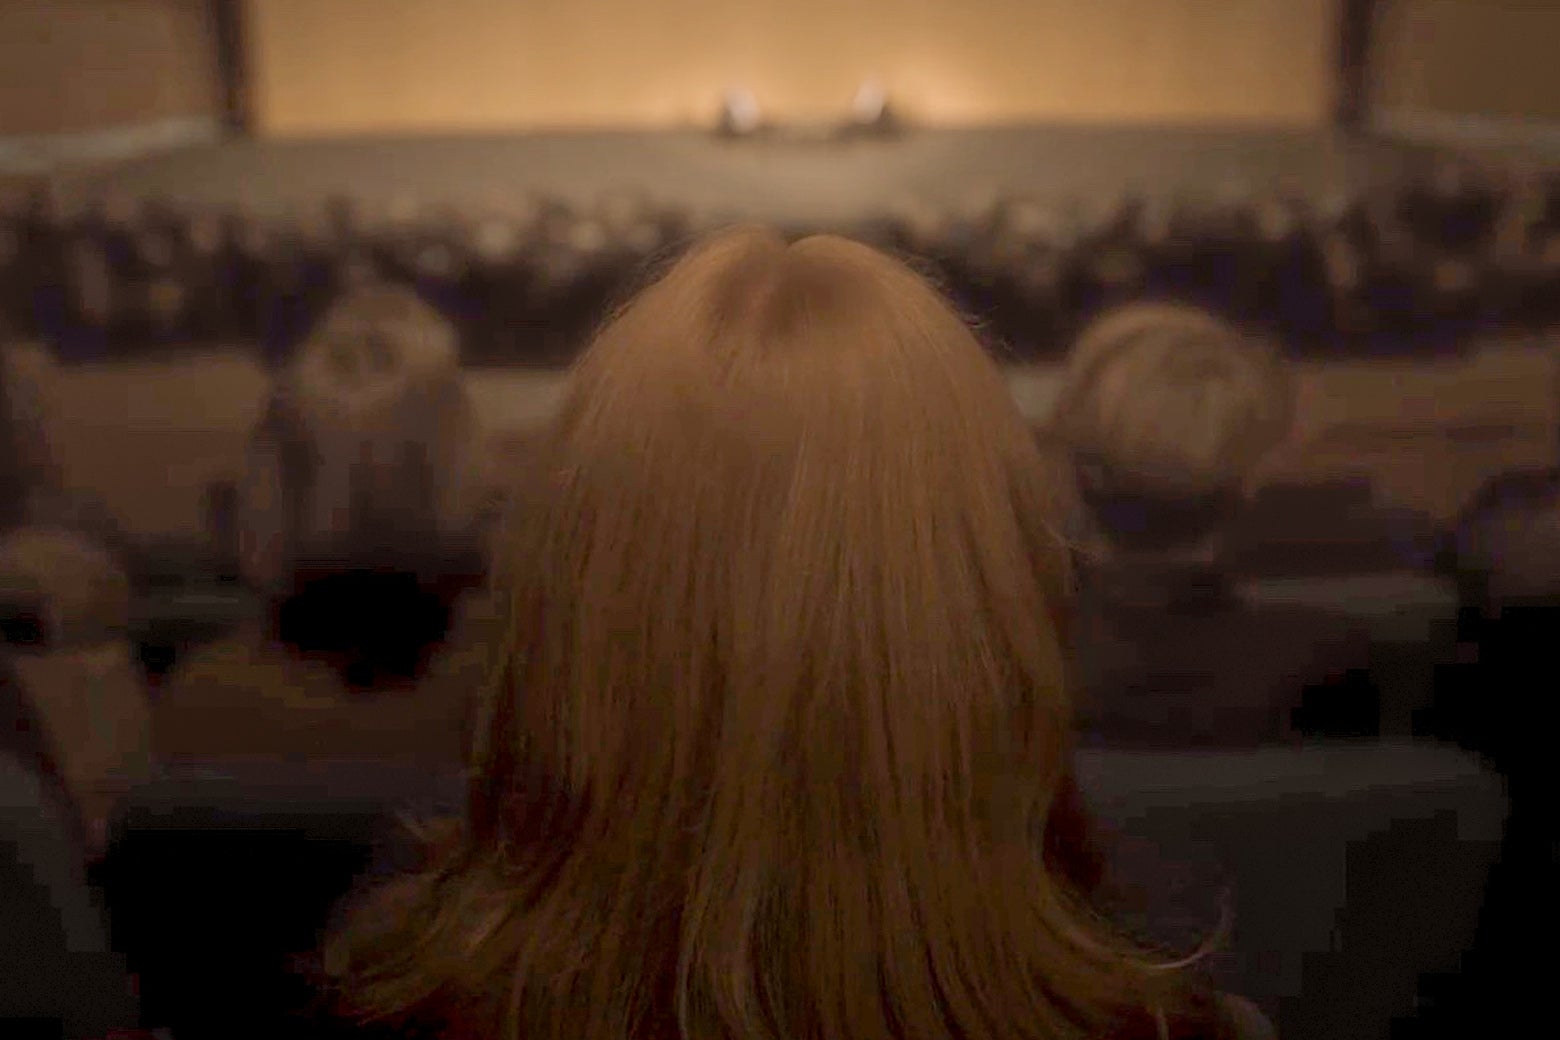 A red-headed woman, facing away from the camera, sits in the audience of a theater.